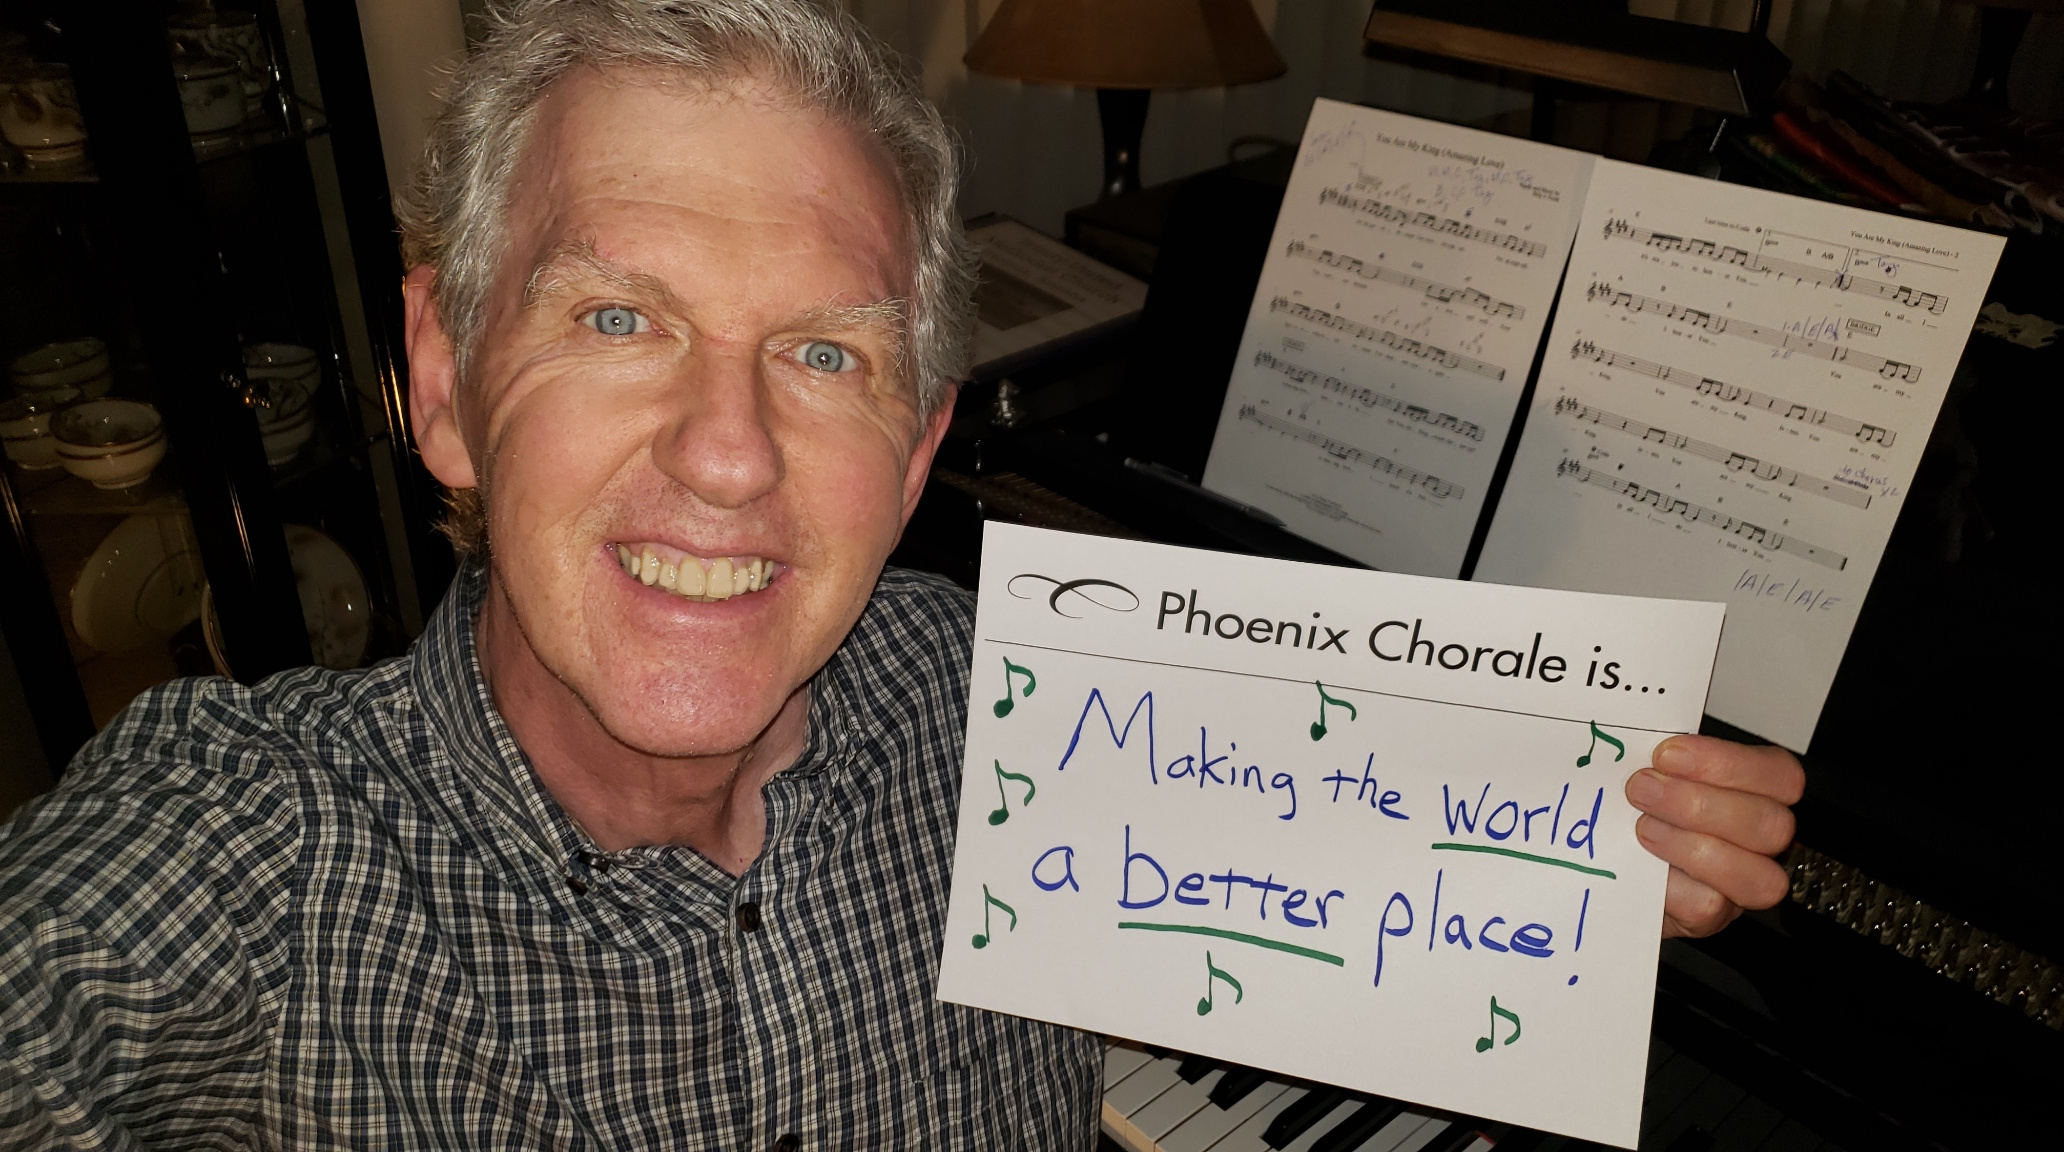 Phoenix Chorale is making the world a better place